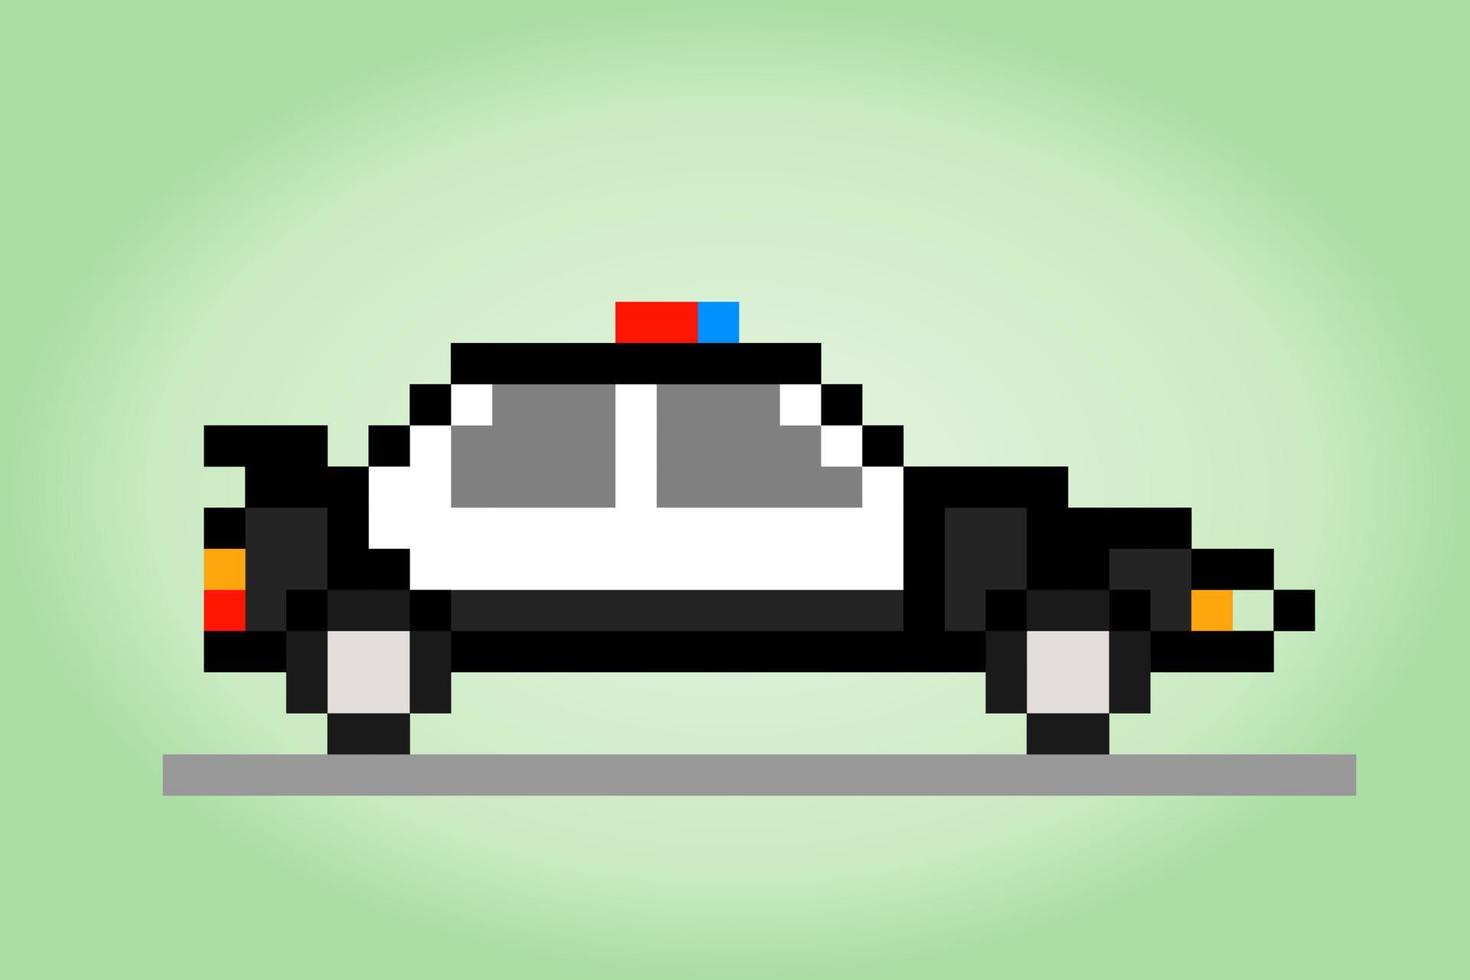 8 bit police car pixels. For game assets and Cross Stitch patterns in vector illustrations.